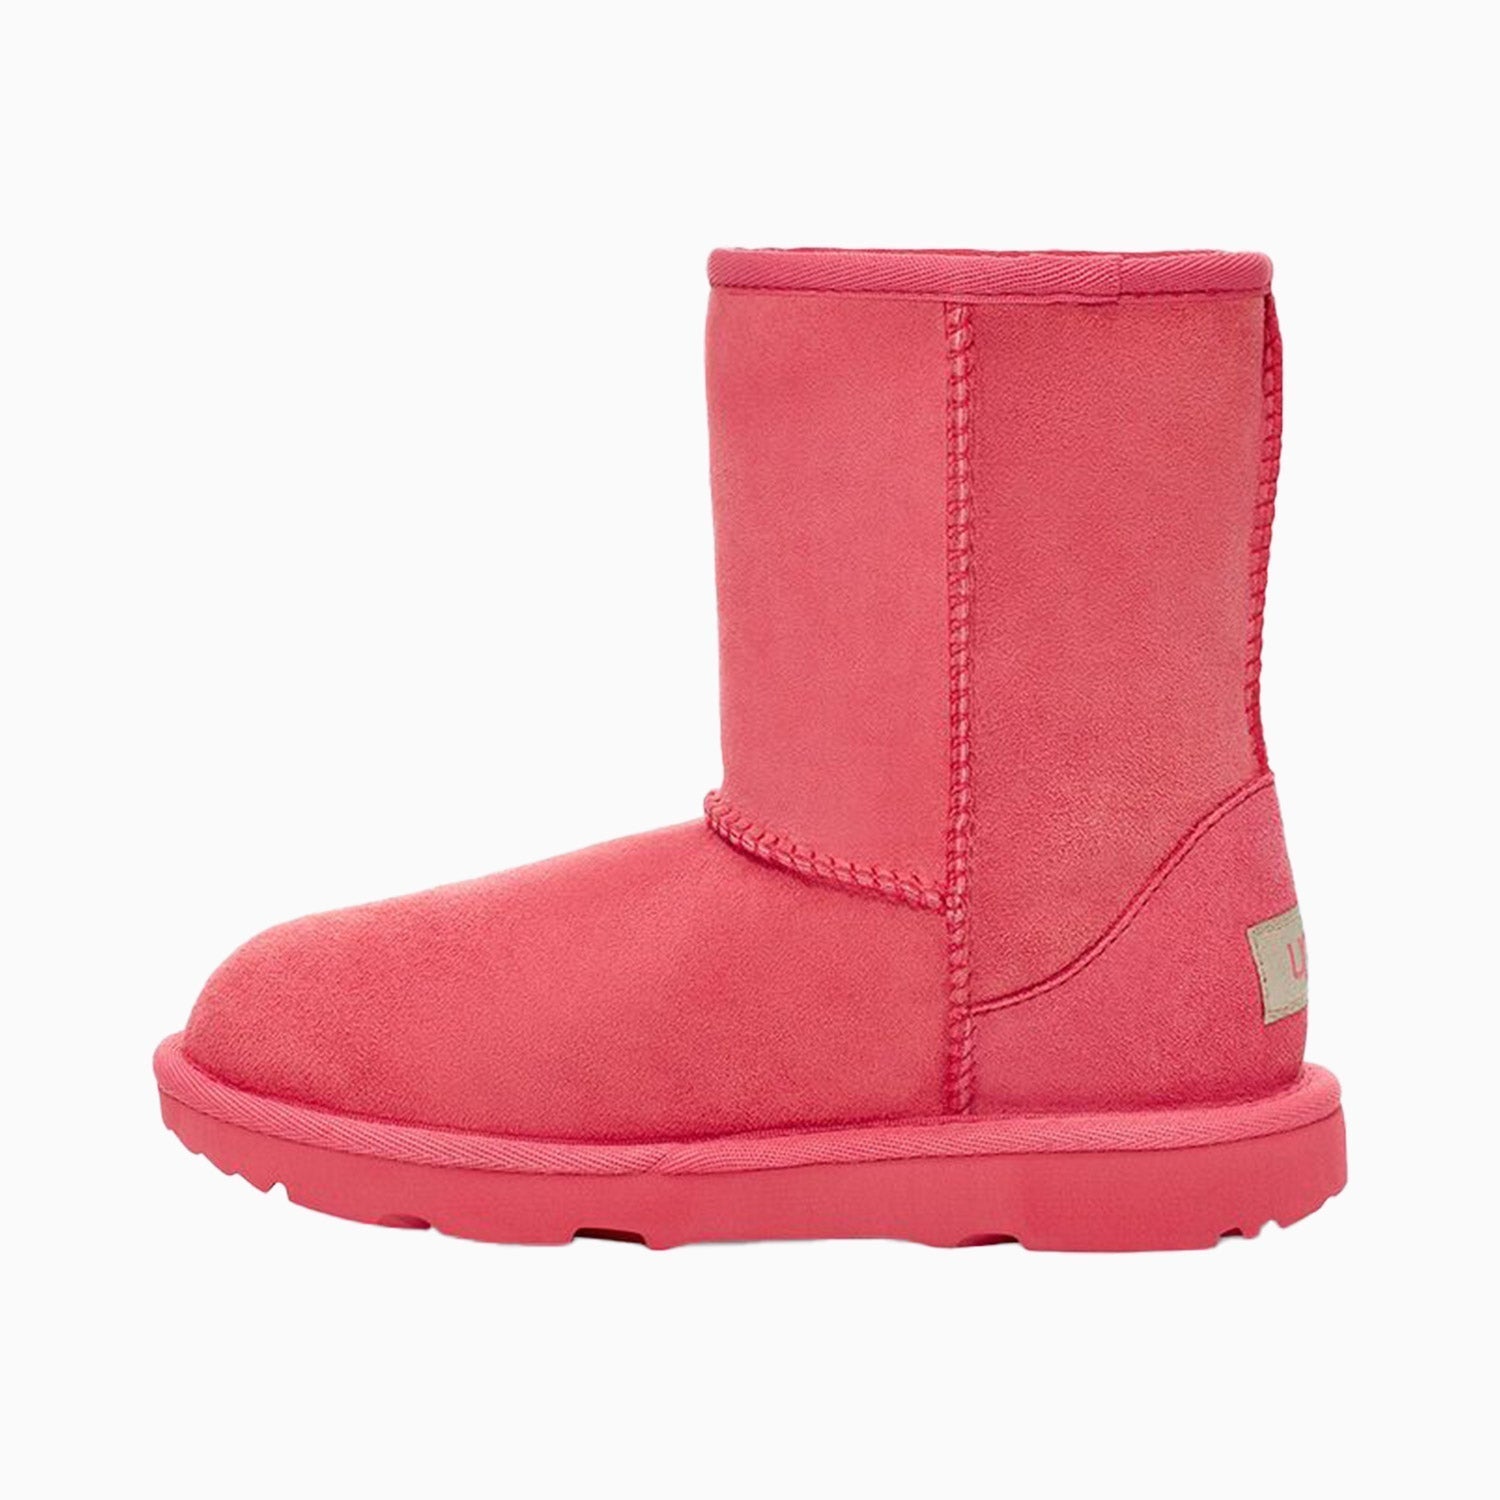 UGG Kid's Classic II Boot - Category: Little Kids, Big Kids - Tops and Bottoms USA -